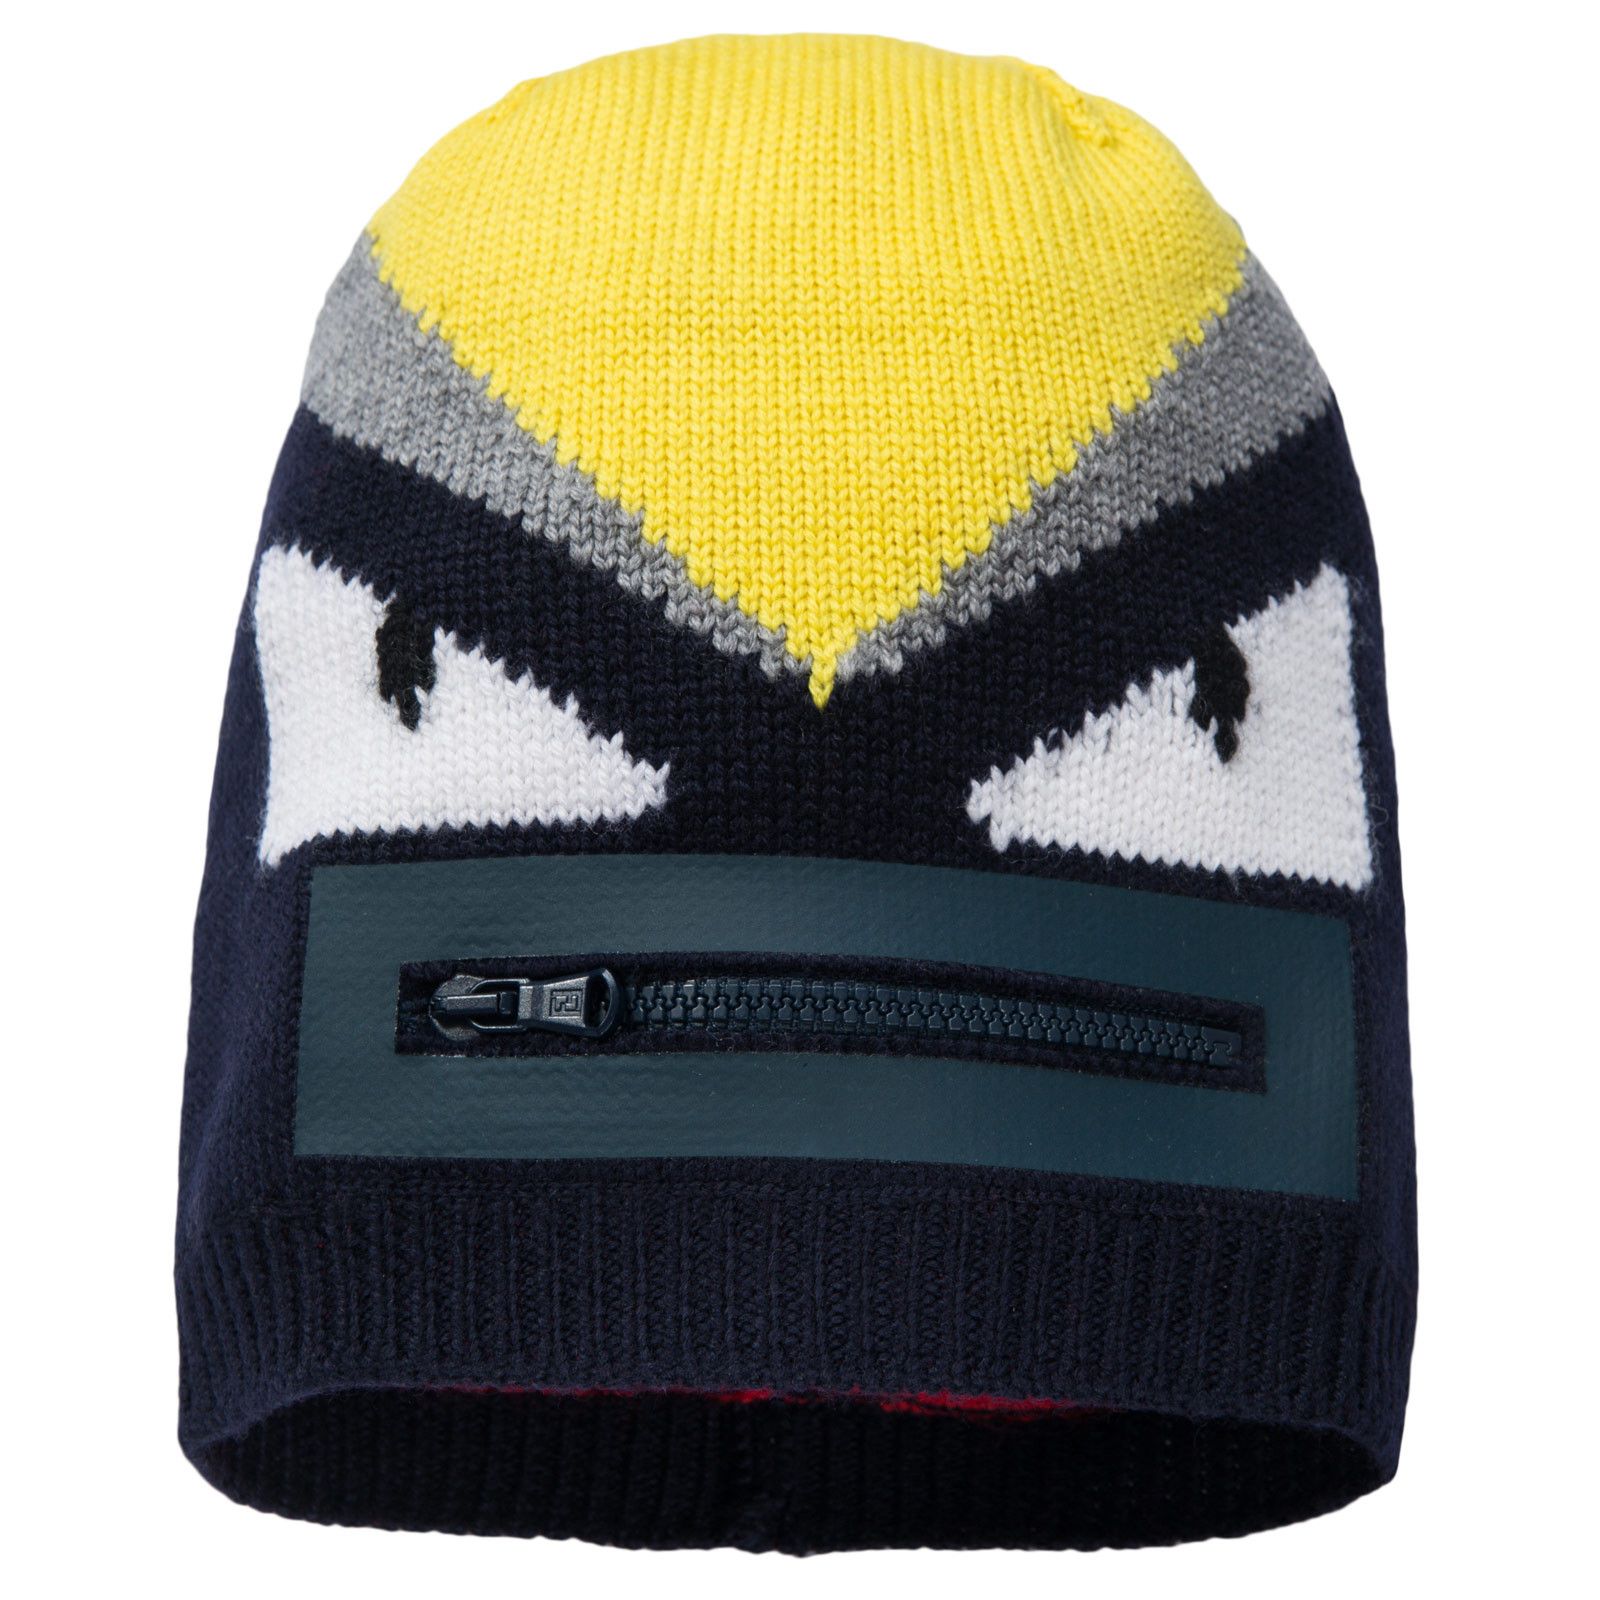 Boys Multicolors Knitted Wool Monster Hat - CÉMAROSE | Children's Fashion Store - 1